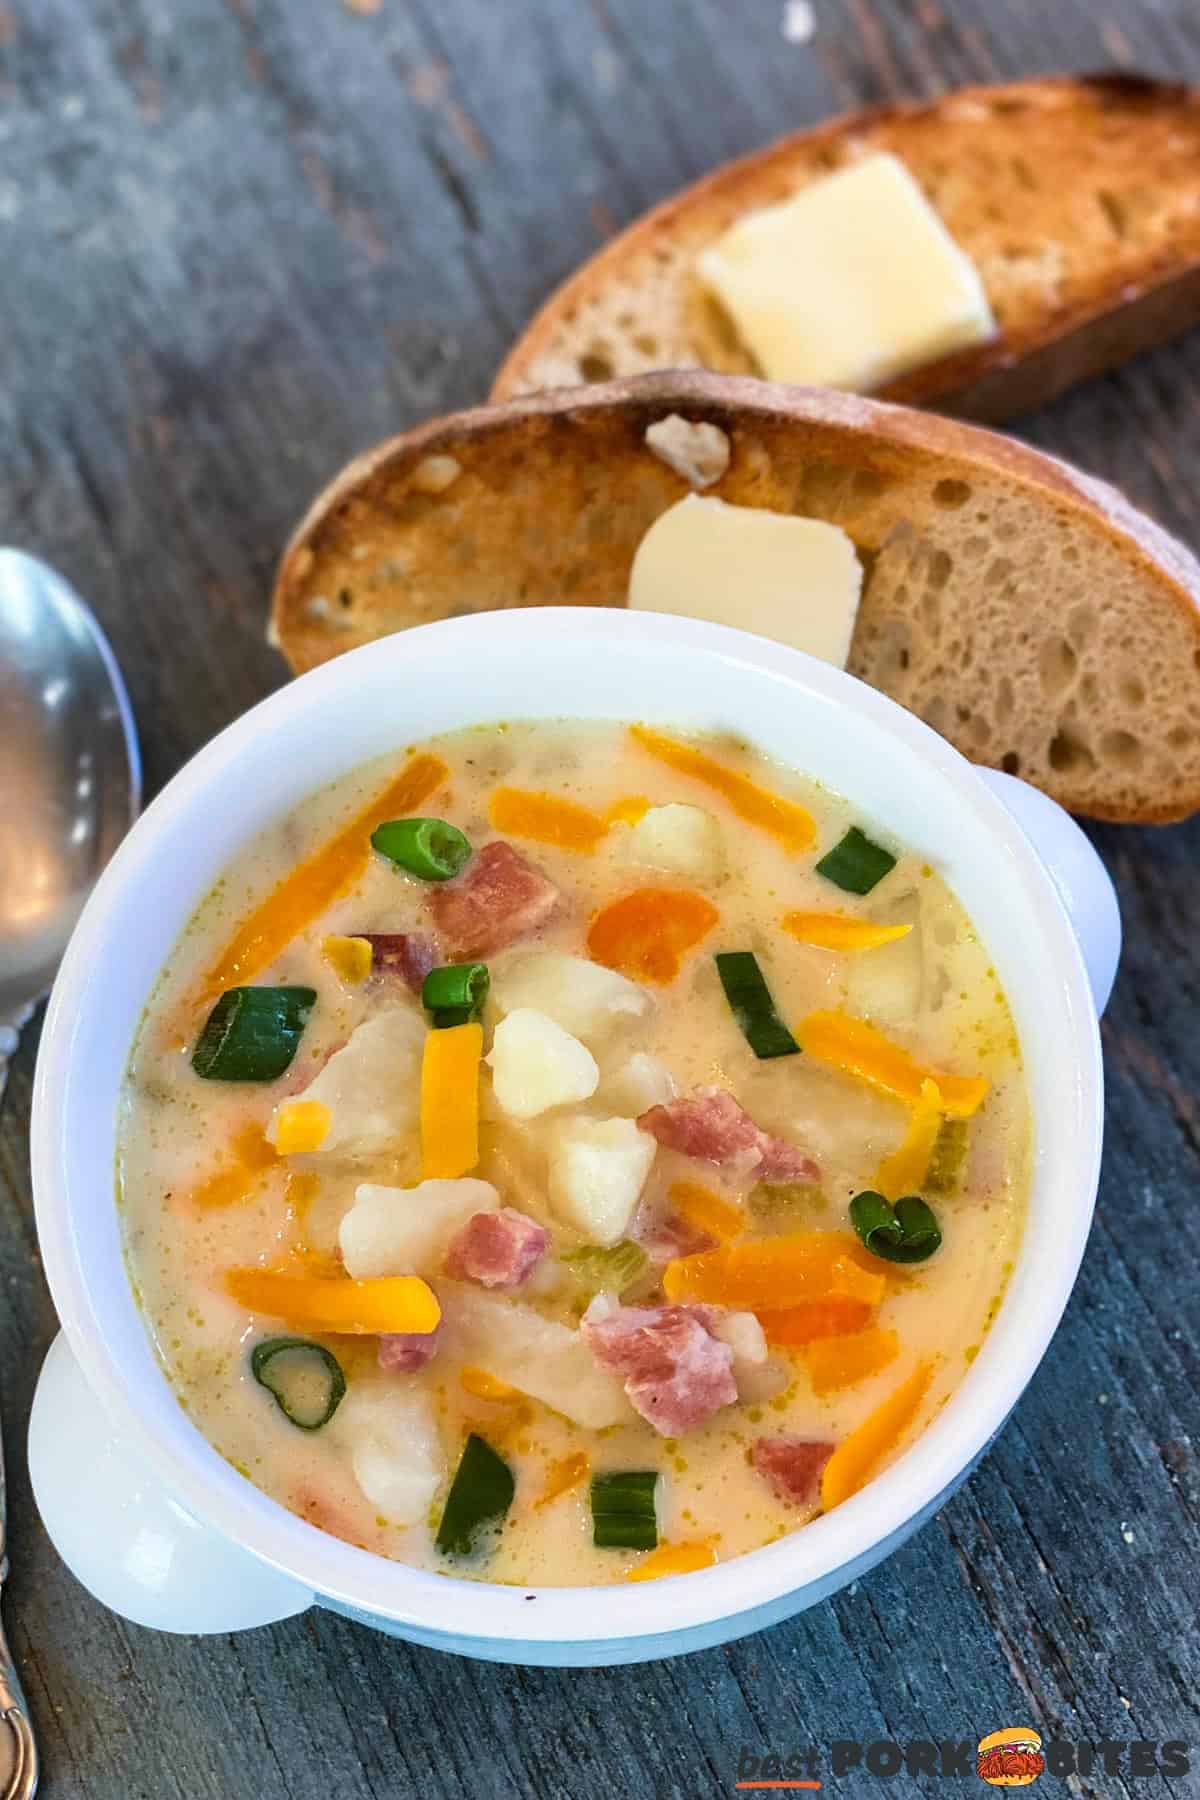 a bowl of ham and potato soup next to two slices of bread with butter